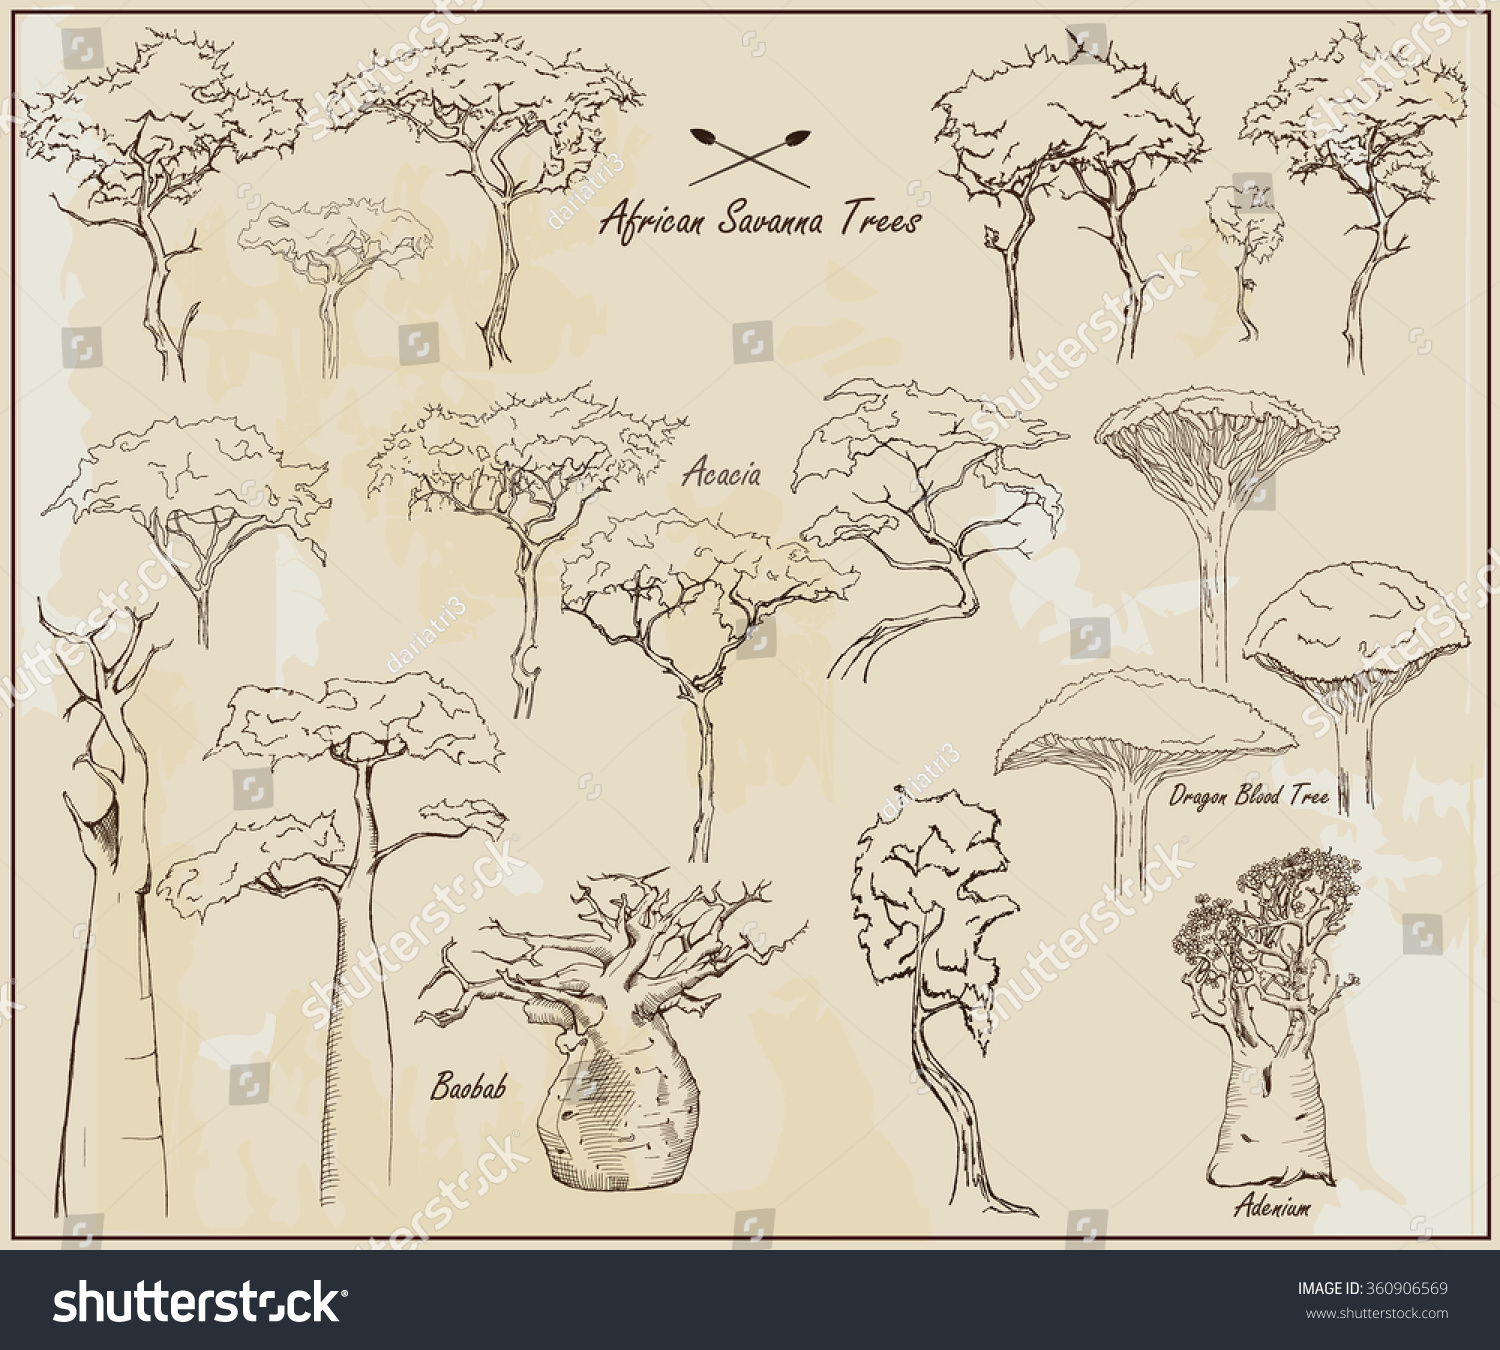 African Savanna Trees, Exotic Trees, Set Of Different Hand Drawn Trees